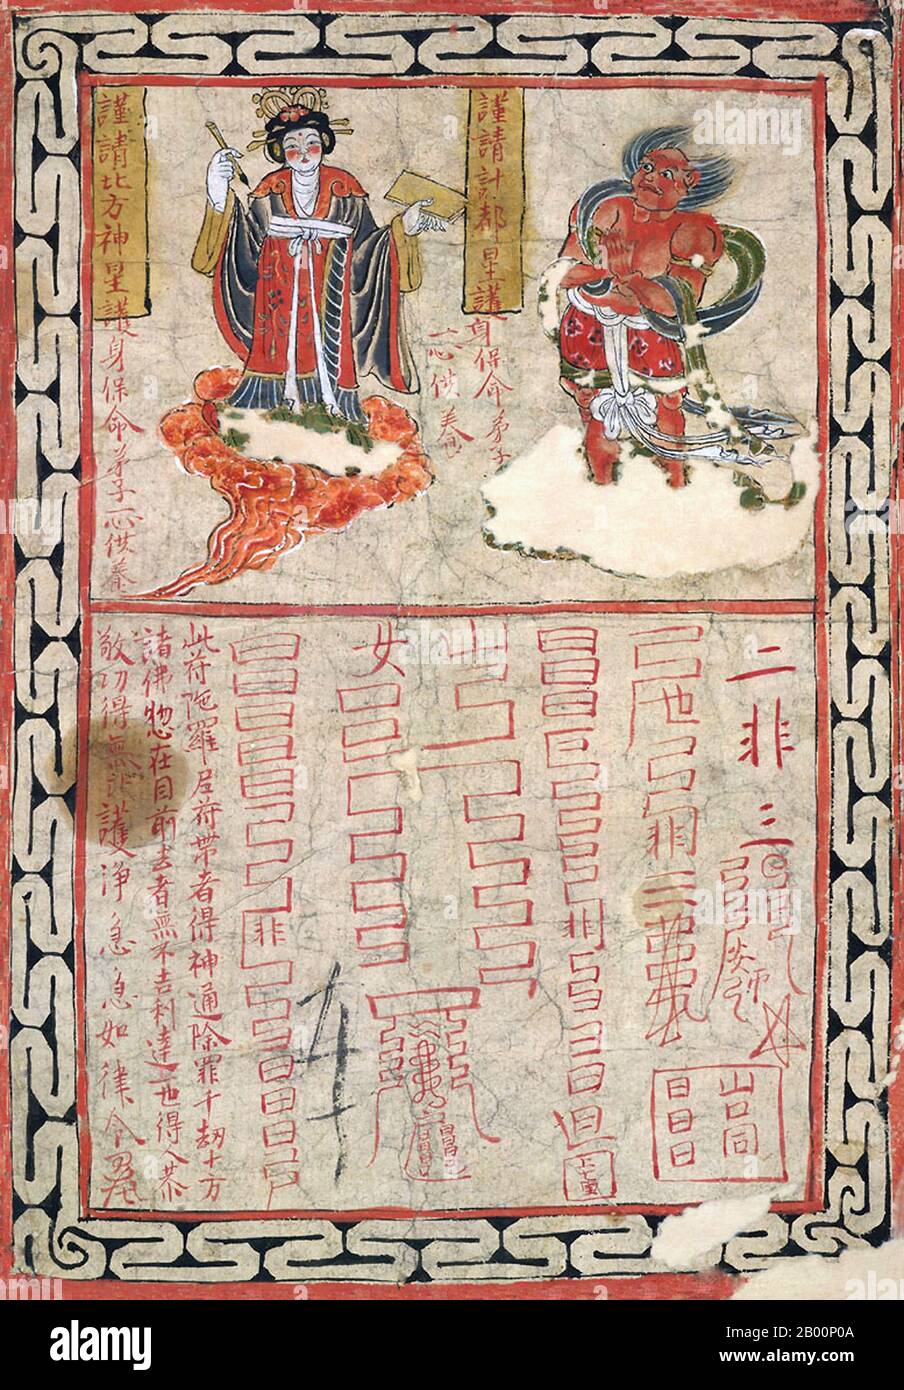 China: Talisman of the Pole Star, ink and colors on paper, mid-10th century, Cave 17, Mogao Grottoes, Dunhuang.  The Mogao Caves, or Mogao Grottoes (also known as the Caves of the Thousand Buddhas and Dunhuang Caves) form a system of 492 temples 25 km (15.5 miles) southeast of the center of Dunhuang, an oasis strategically located at a religious and cultural crossroads on the Silk Road, in Gansu province, China. The caves contain some of the finest examples of Buddhist art spanning a period of 1,000 years. The first caves were dug out 366 CE as places of Buddhist meditation. Stock Photo